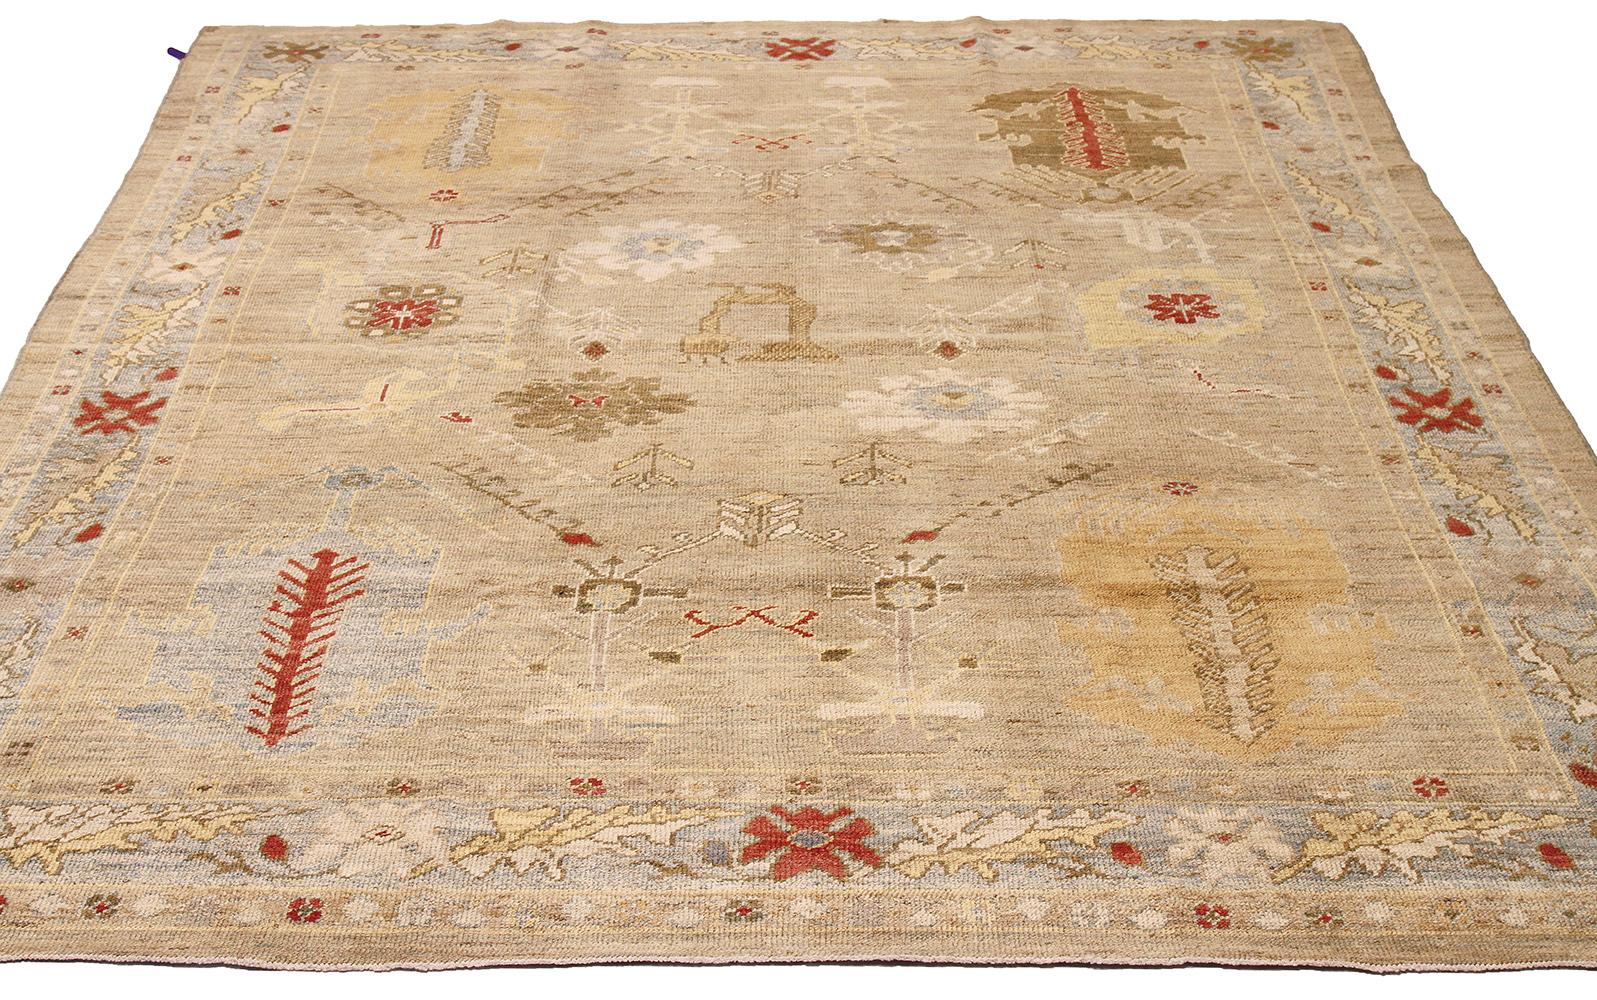 New Persian rug made of handwoven sheep’s wool of the finest quality. It’s colored with organic vegetable dyes that are certified safe for humans and pets alike. It features multicolored botanical and floral details associated with Oushak weaving